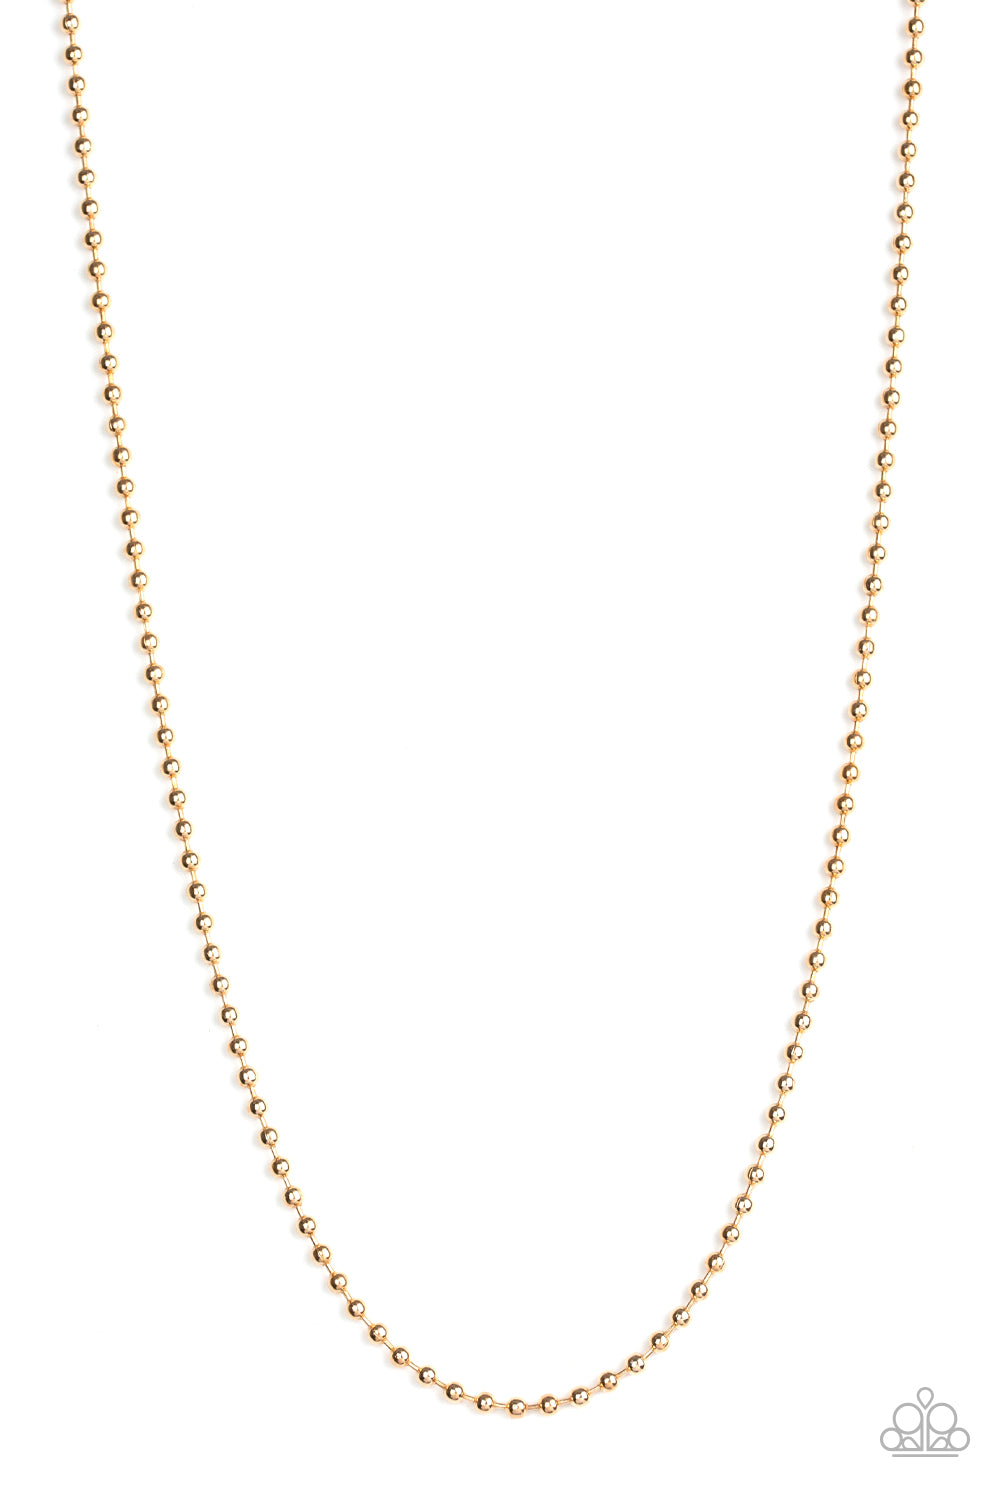 New Paparazzi Necklace - Unisex - A dainty strand of gold ball chain drapes across the chest for a causal look.